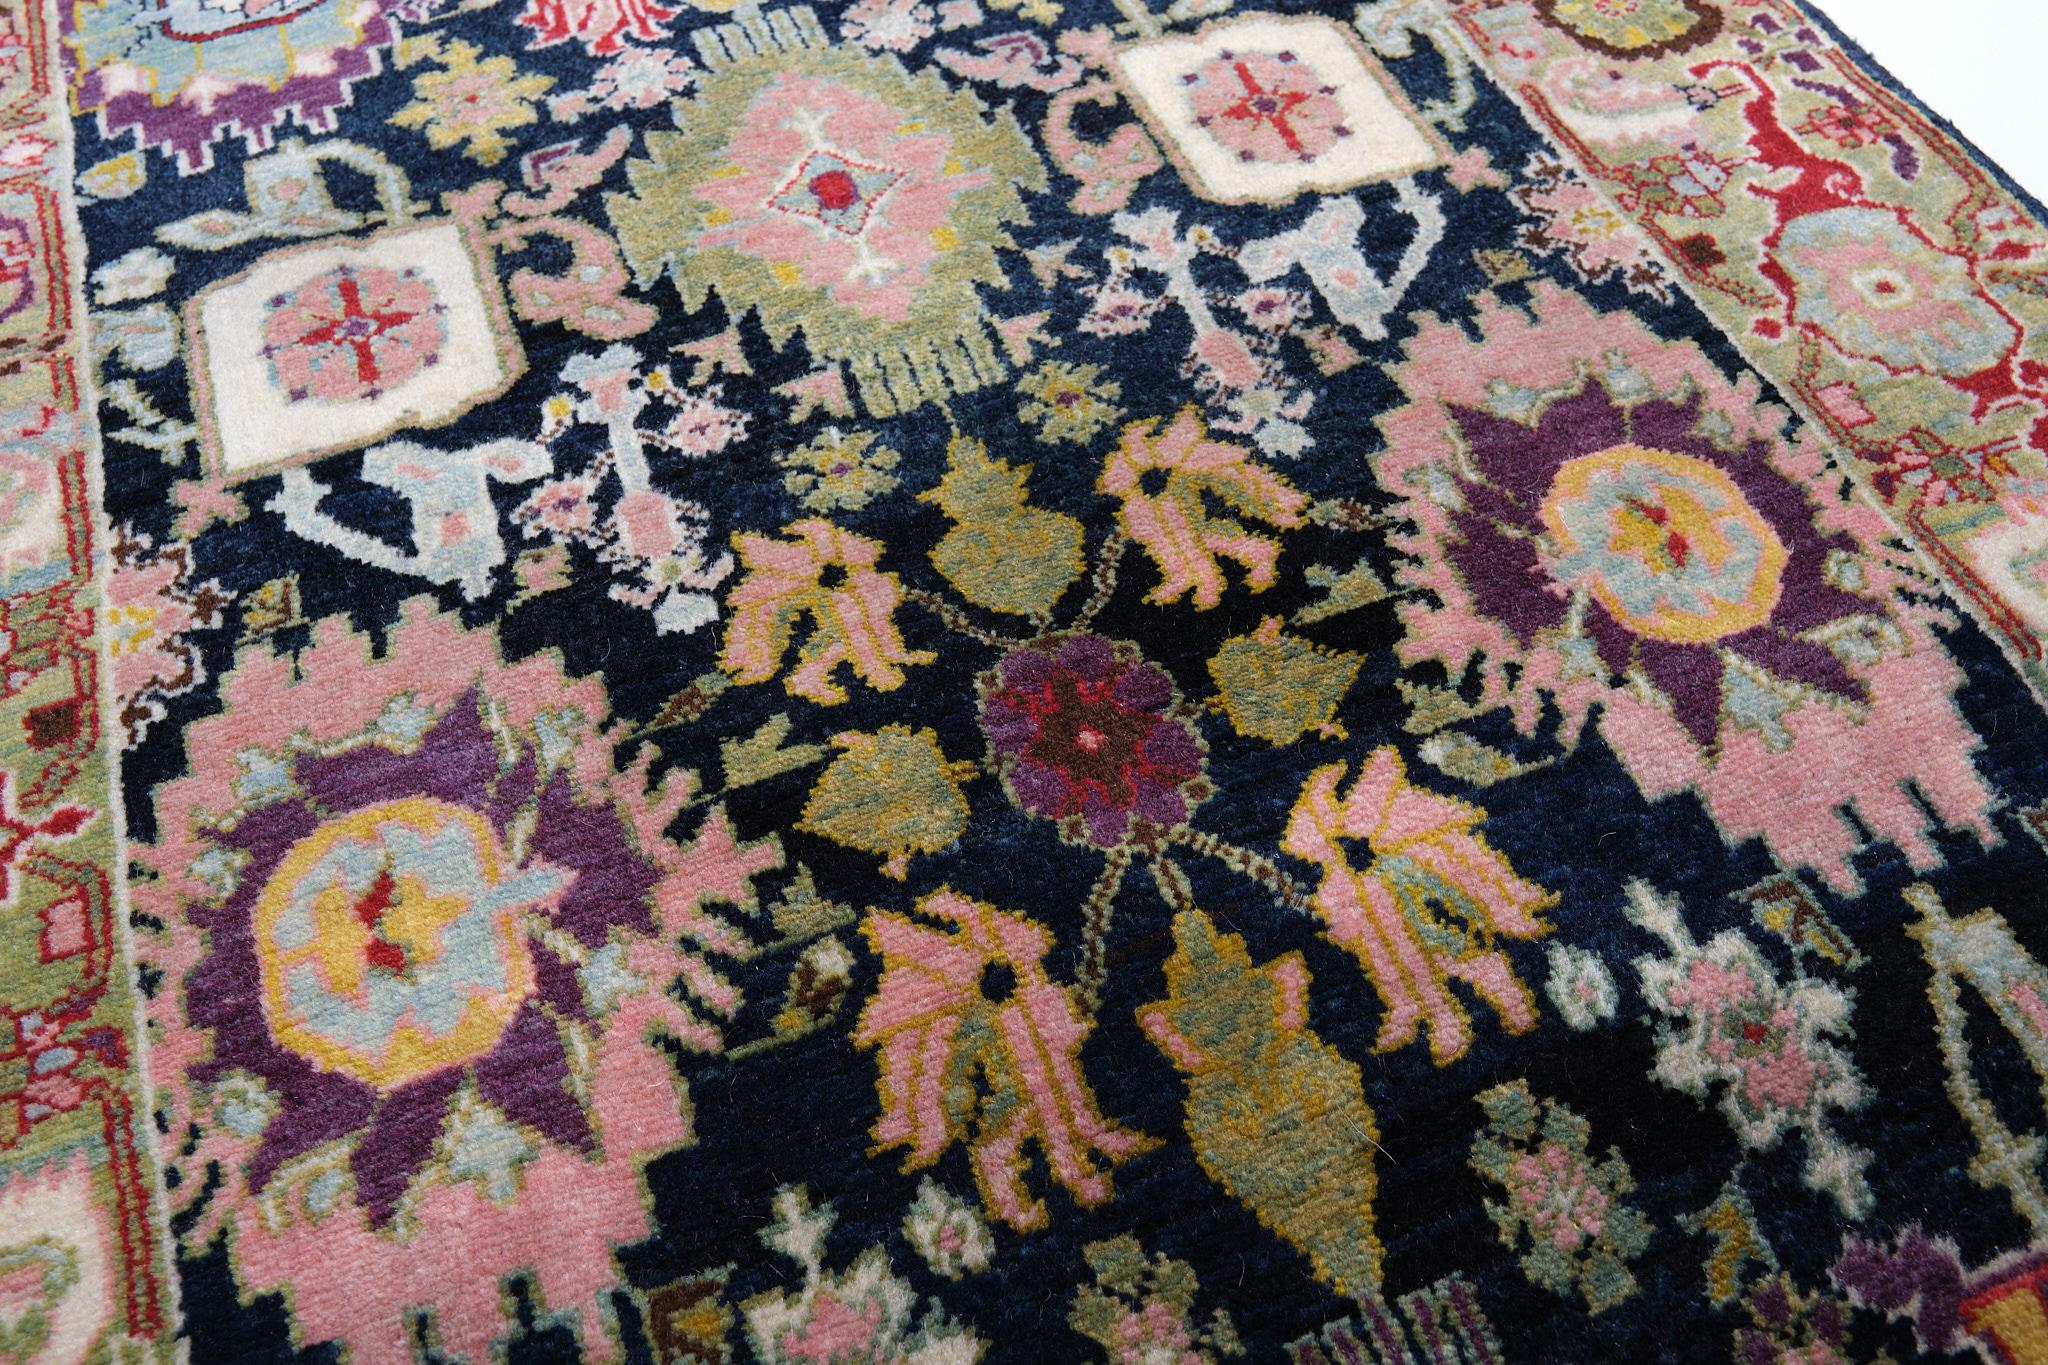 This offset pattern is composed of palmettes and flowers, one has the impression that it is only part of a larger scheme designed 19th century rug from the Bidjar region, Eastern Kurdistan area. Very similar palmettes, drawn in a curvilinear manner